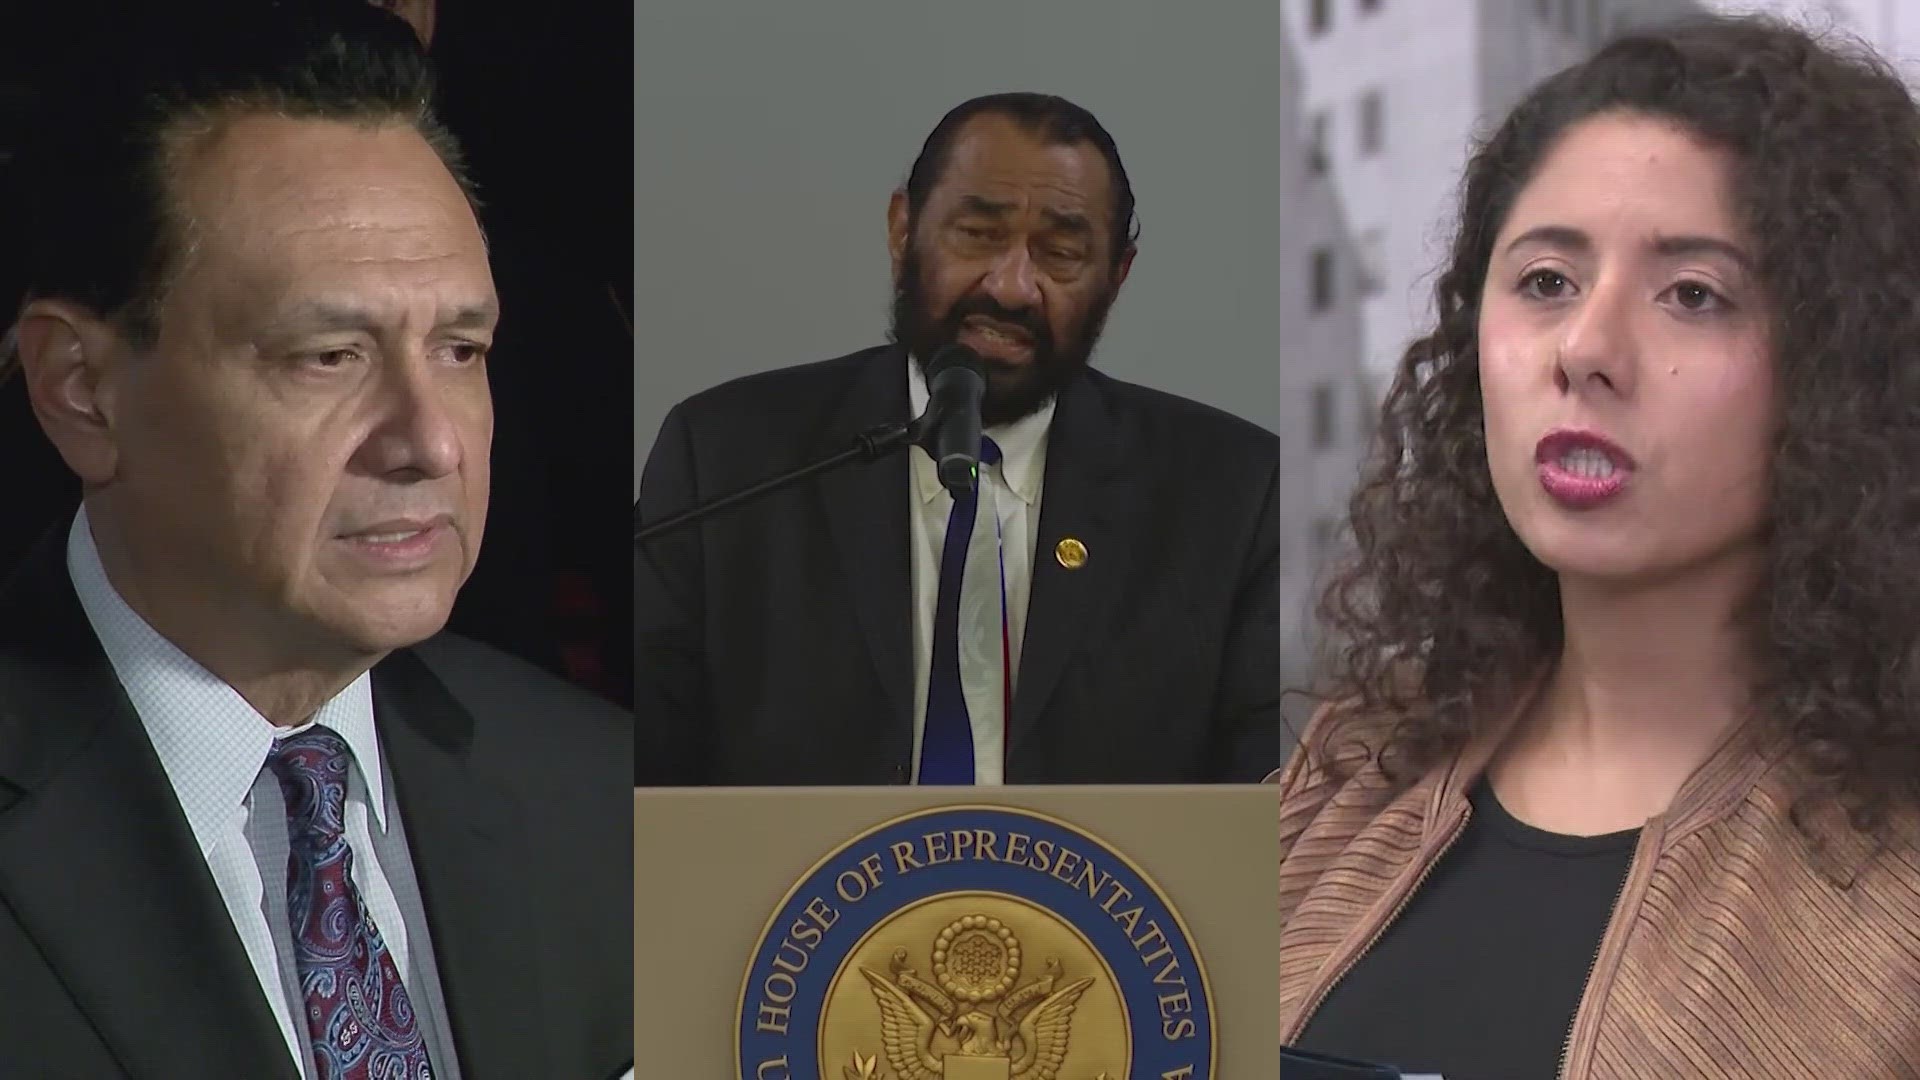 The University of Houston Hobby School of Public Affairs asked likely Democratic primary voters for their thoughts on top Harris County political figures.